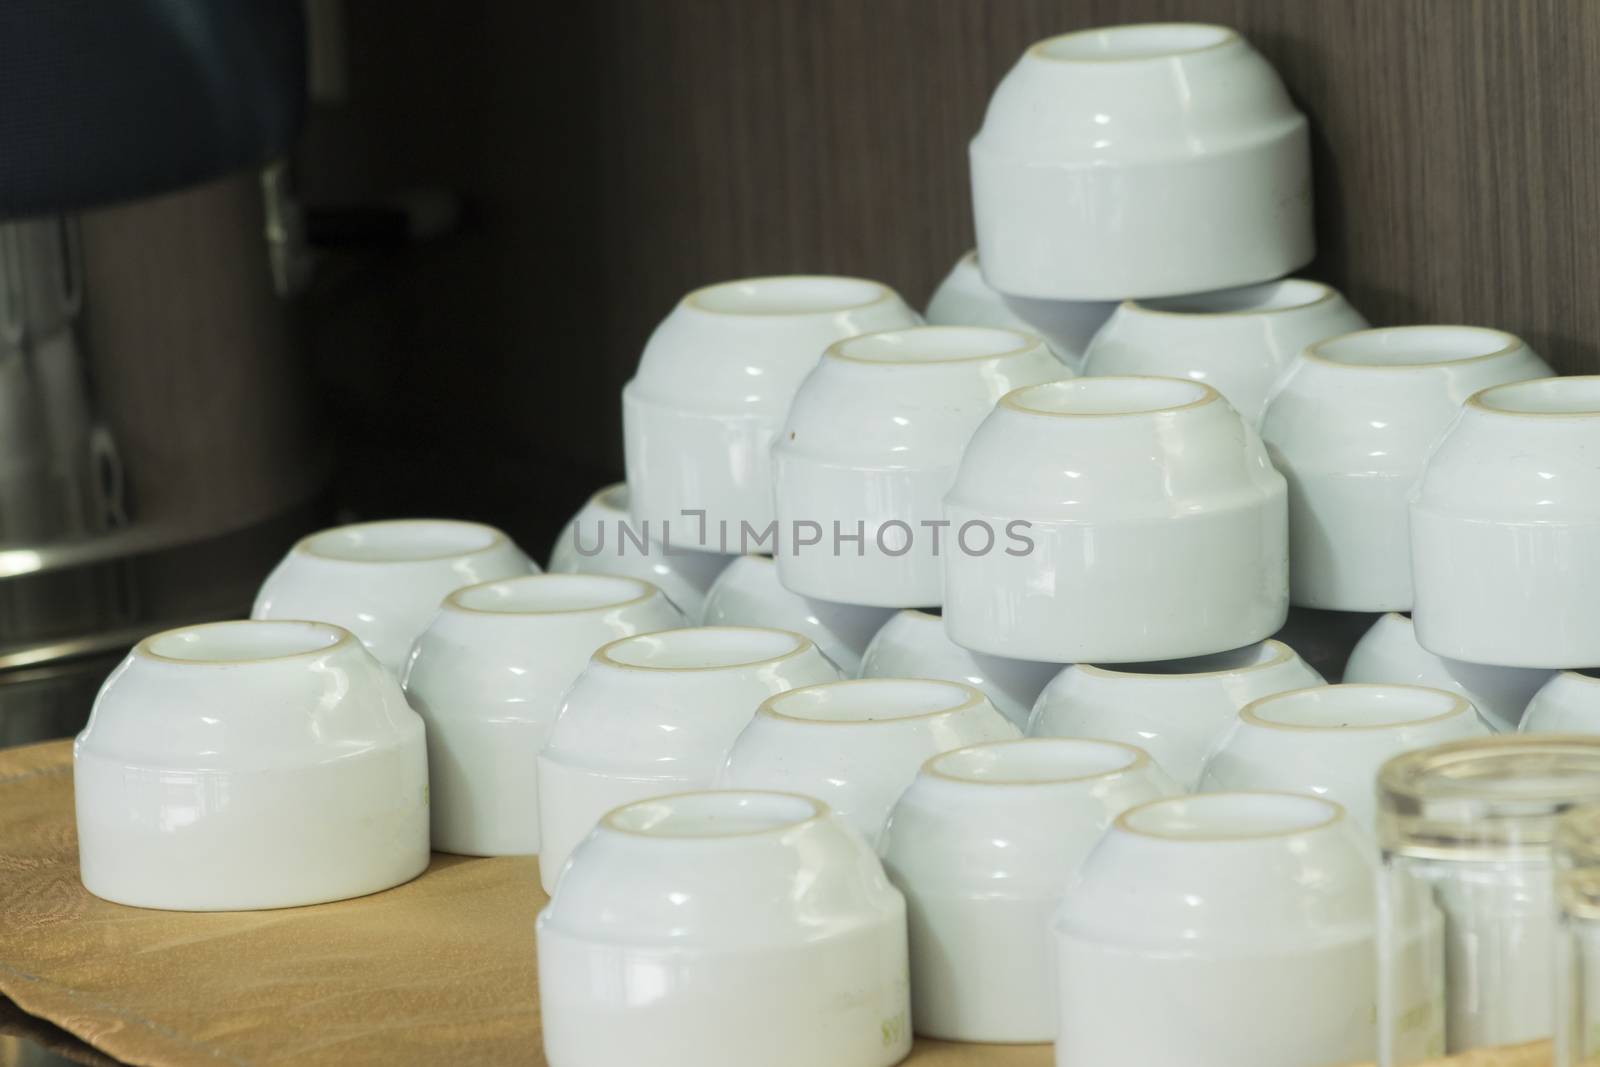 White cups for tea piled on table with plates for coffee-break